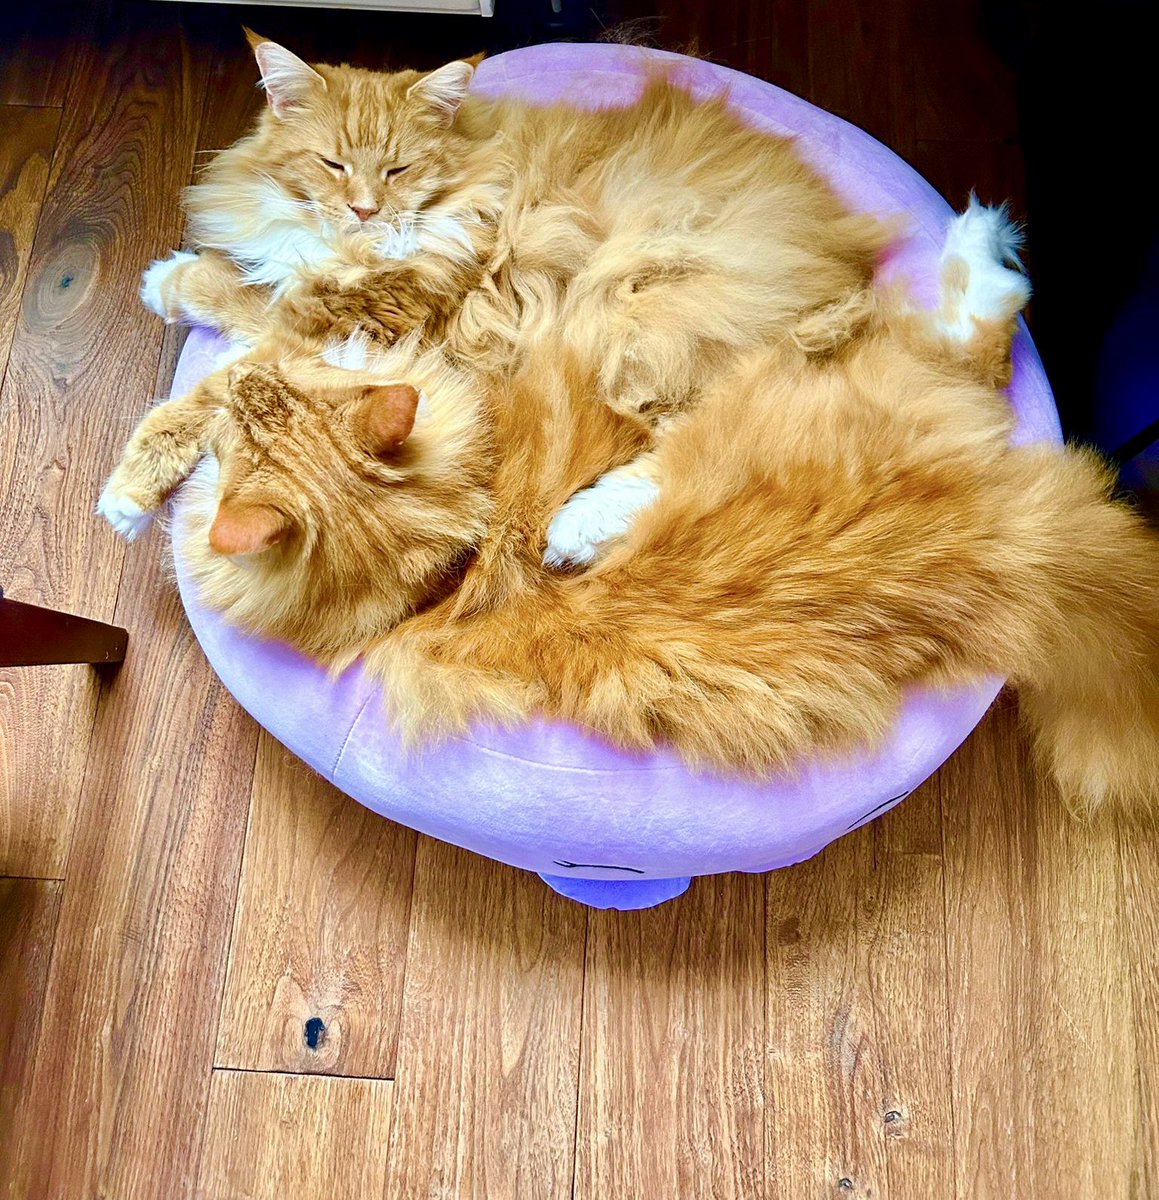 You put your left leg in…your right leg out…tail goes there then have some shenanigans to try and establish dominance. That’s what it’s all about…oi! 😹😹🦁🦁 #Caturday #teamfloof #CatsOfTwitter #hokeycokeycats